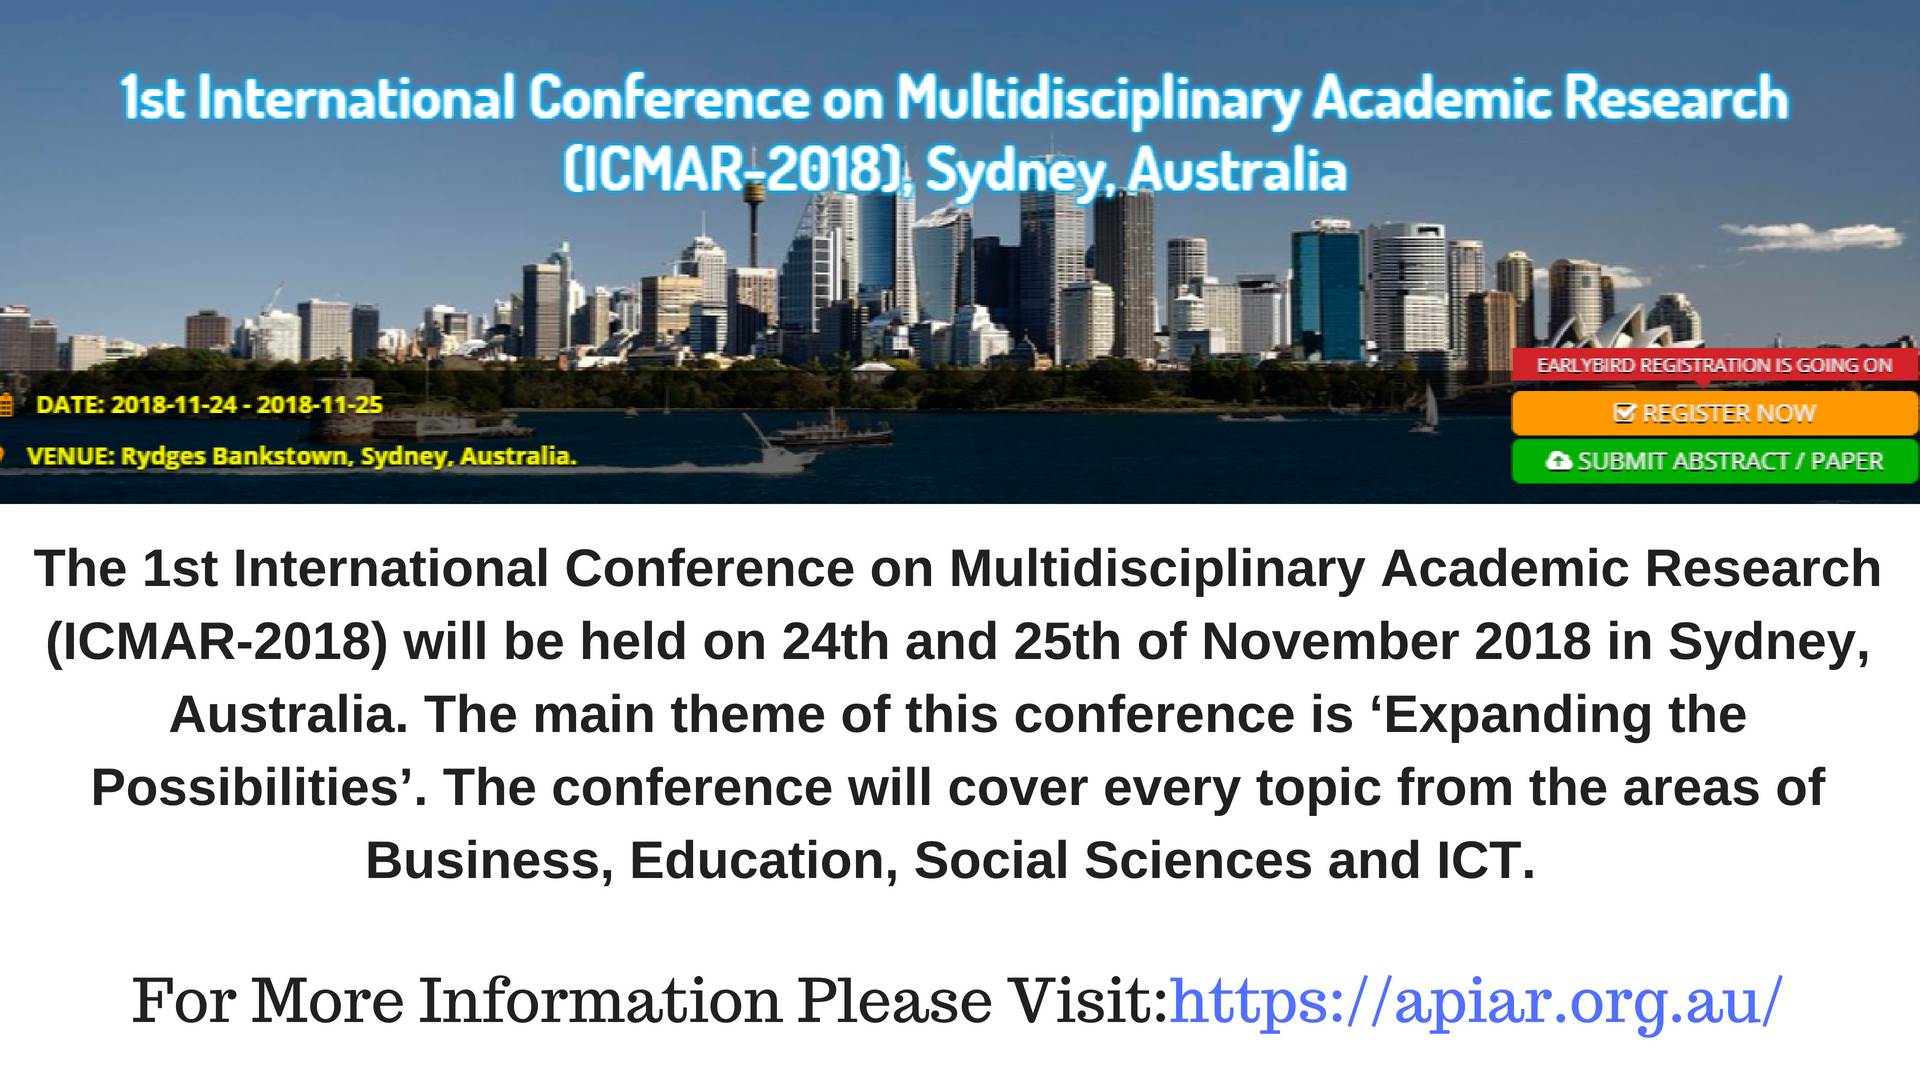 Sydney Conference.jpg  by apiaracademics